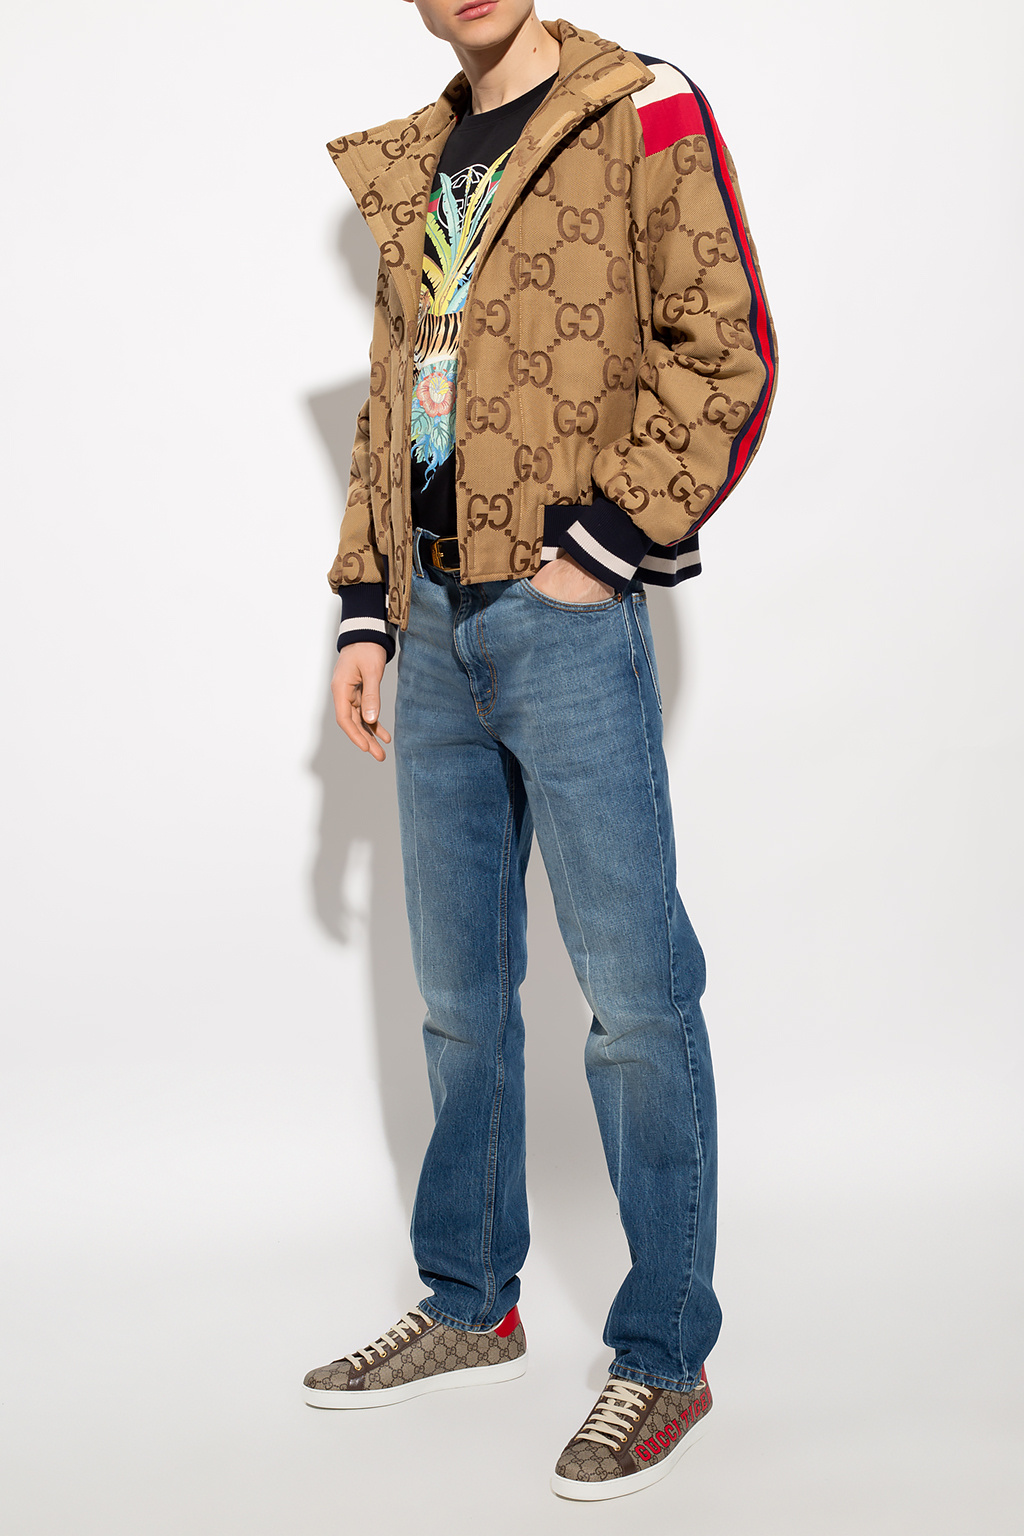 Gucci jacket from the 'Gucci Tiger' collection | Men's Clothing | Vitkac